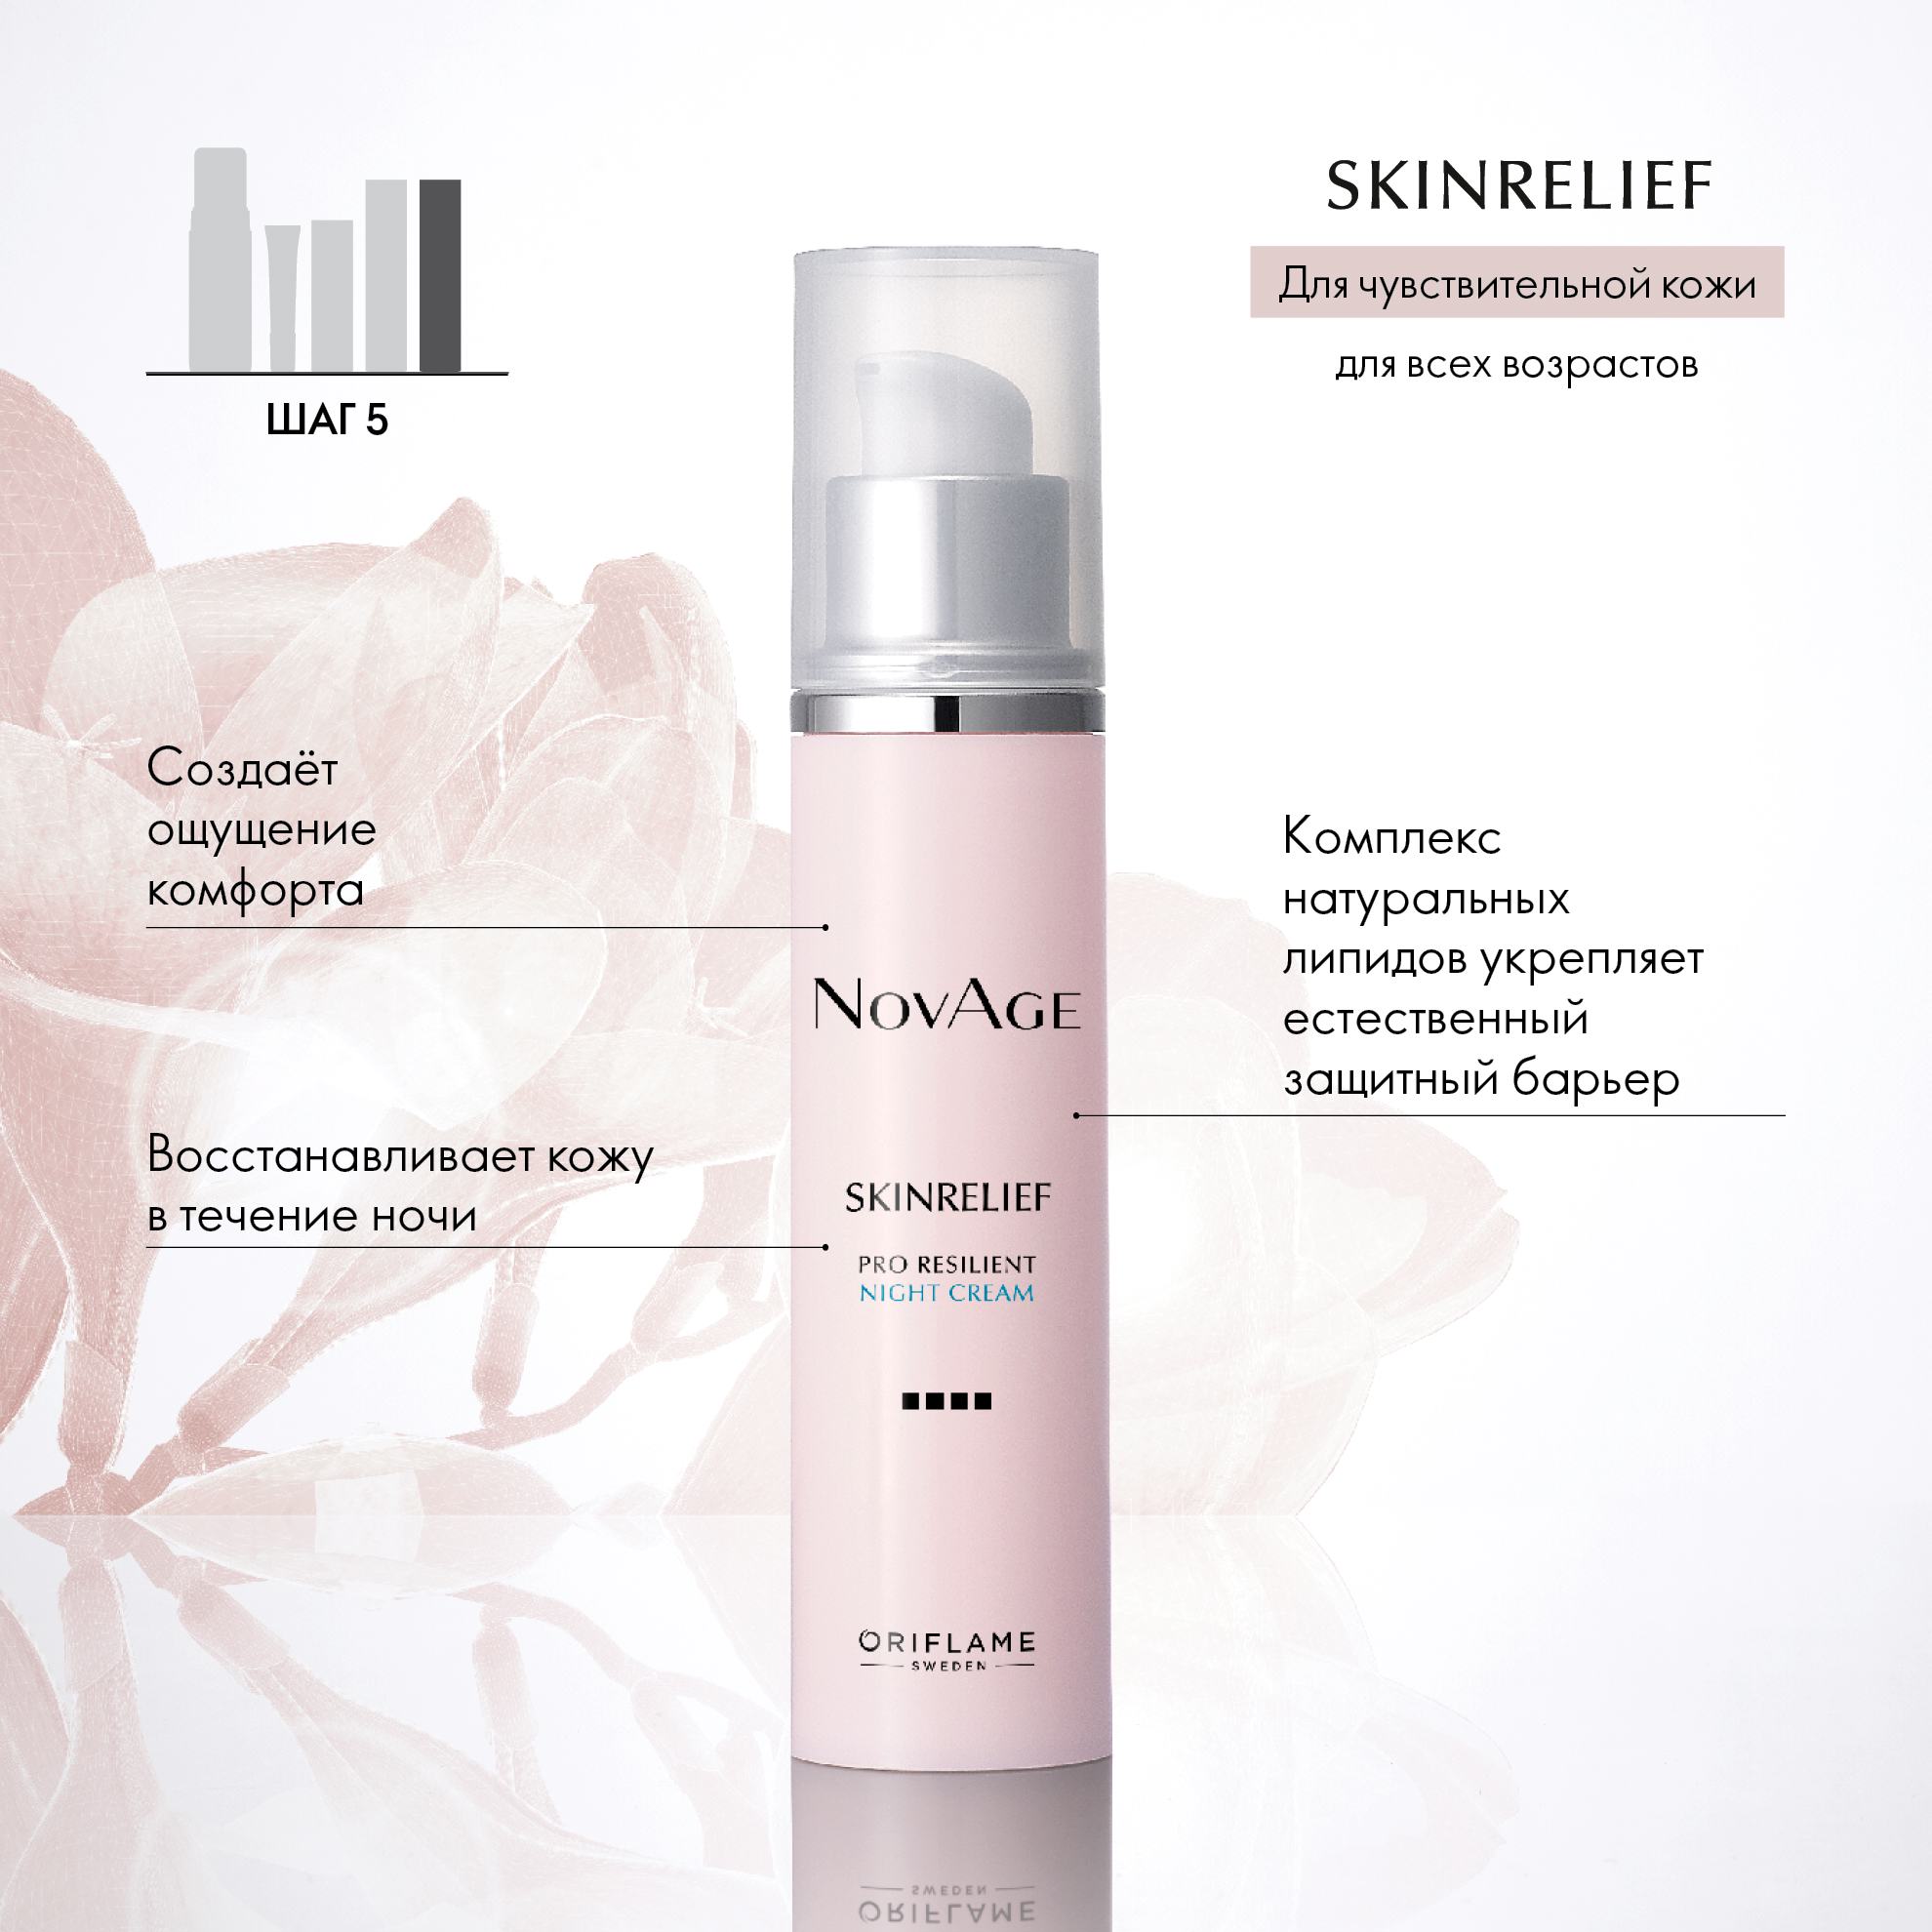 https://media-cdn.oriflame.com/productImage?externalMediaId=product-management-media%2fProducts%2f38385%2fUA%2f38385_3.png&id=15488532&version=1